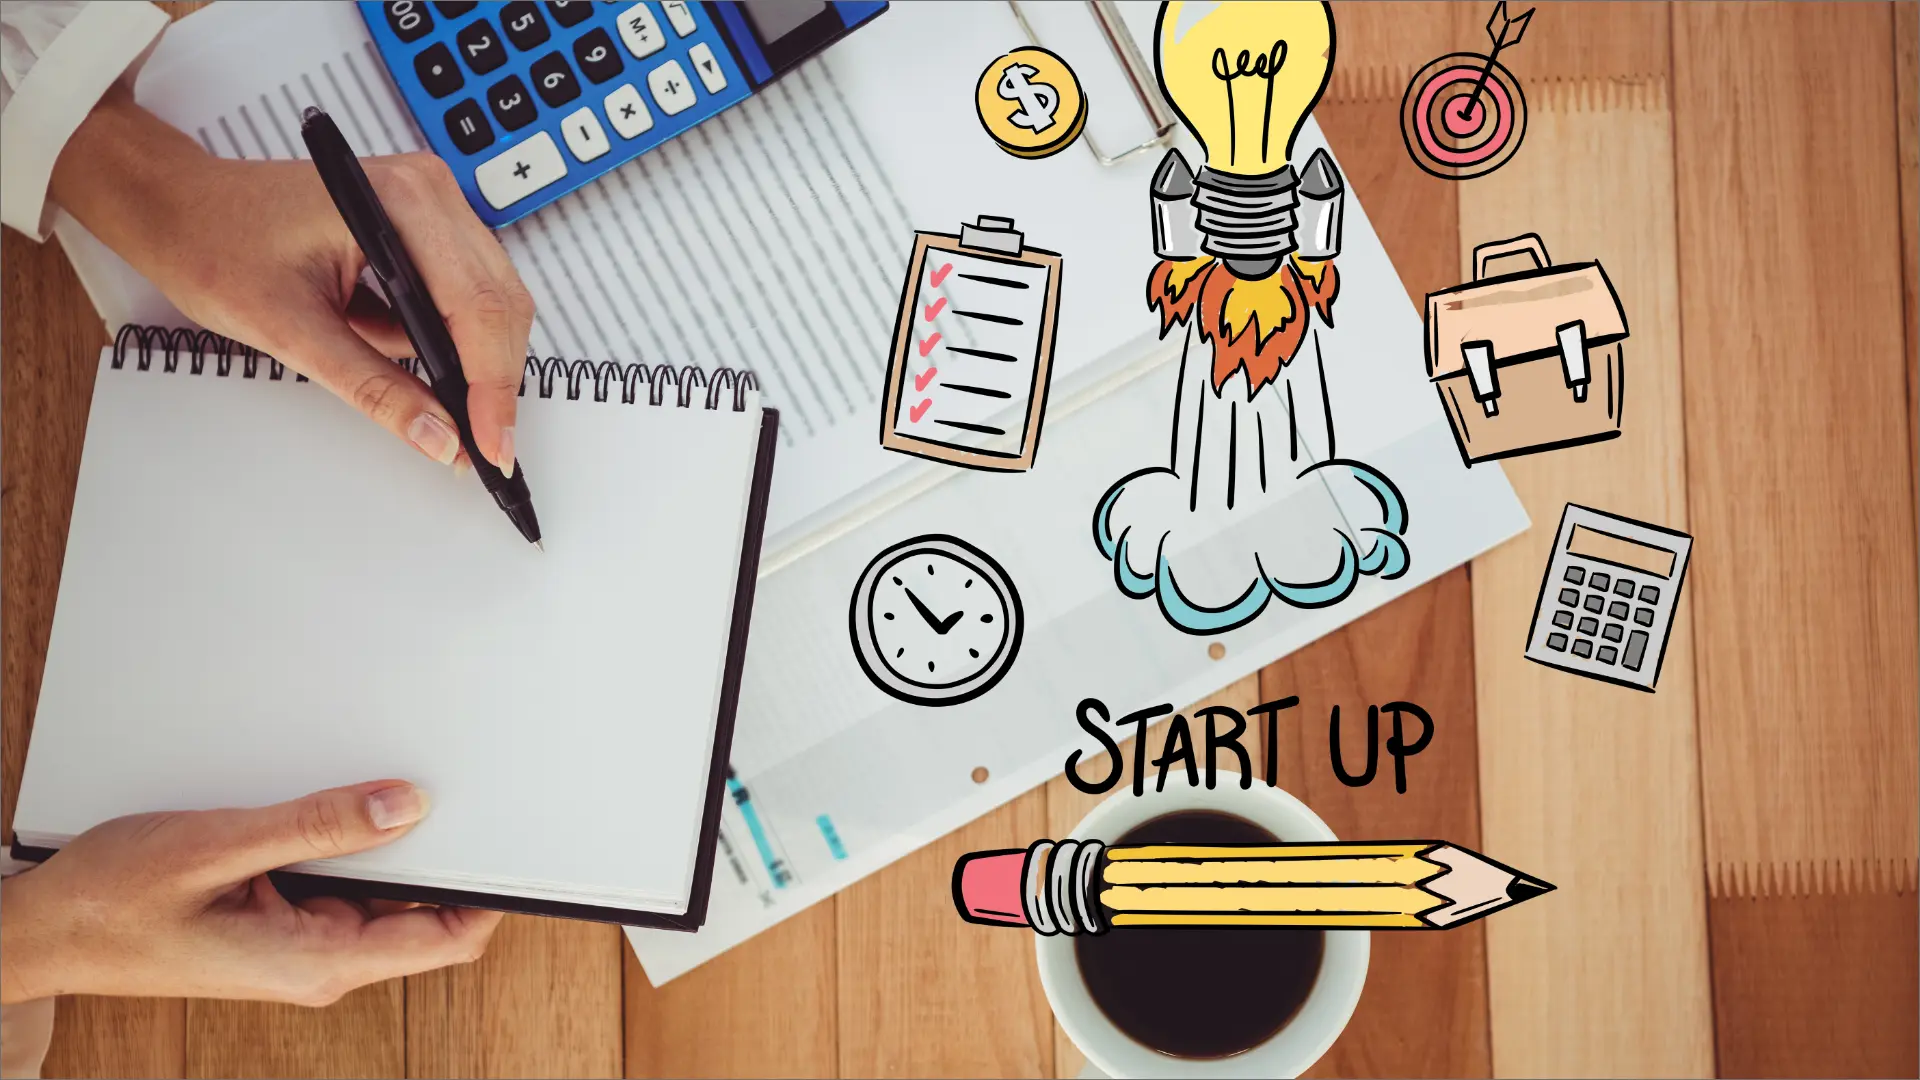 Lead Generation Tips for Start-Ups